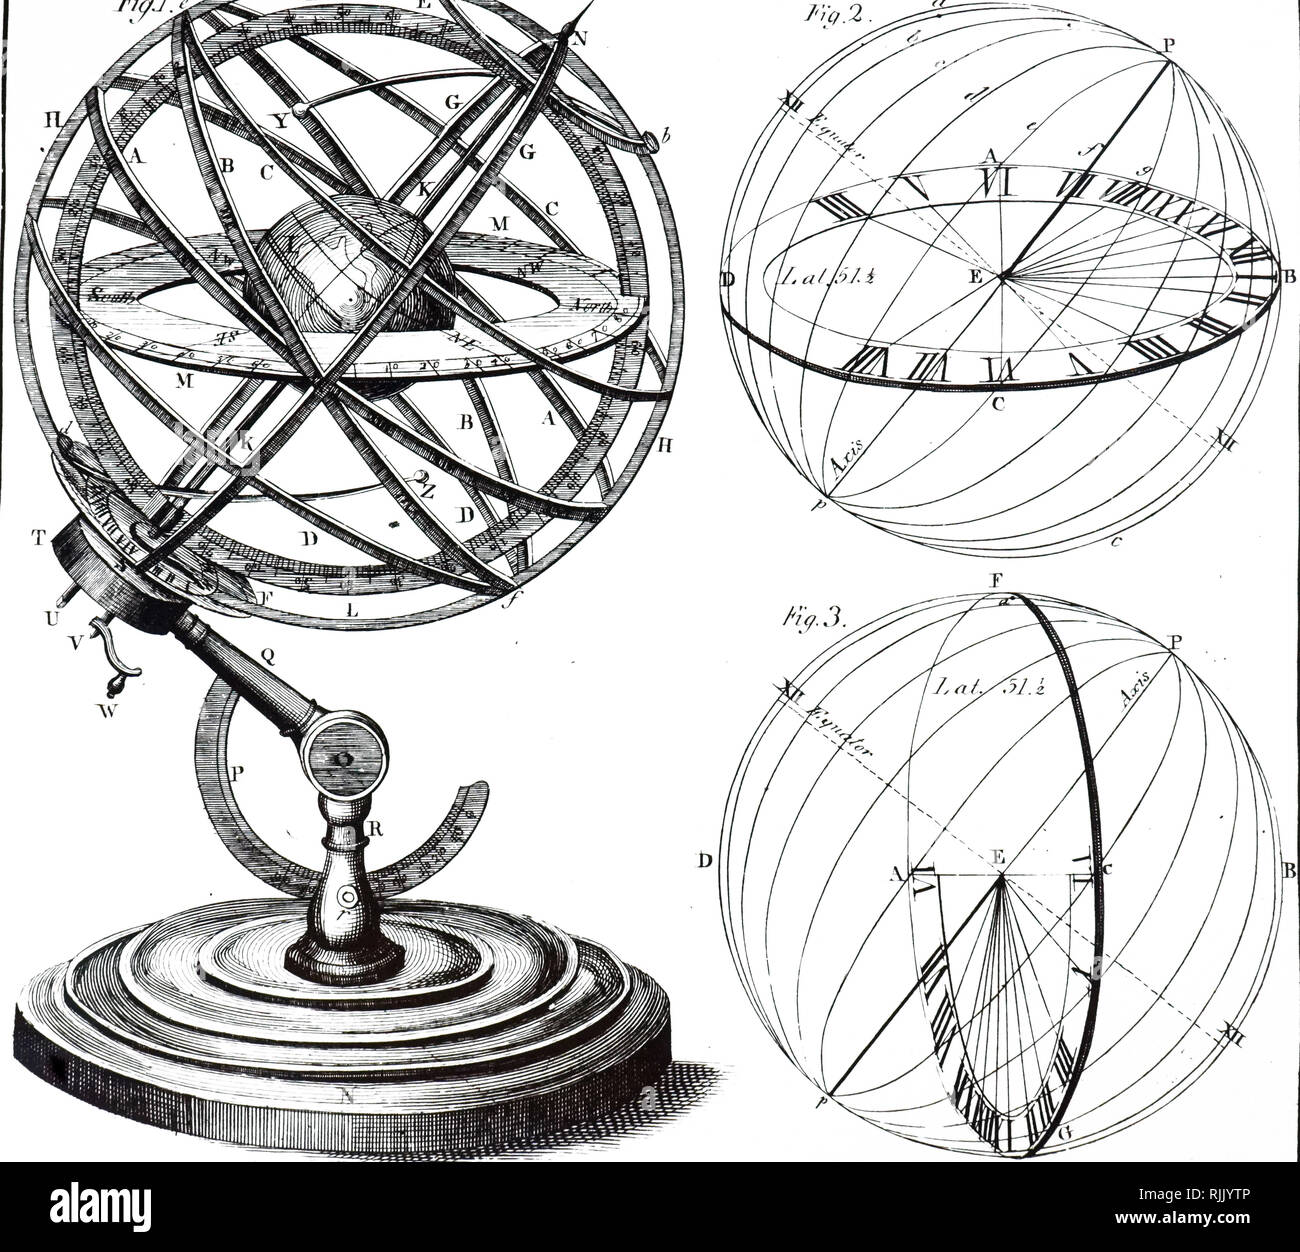 An engraving depicting an armillary sphere, and diagrams for horizontal and vertical dials. Dated 19th century Stock Photo